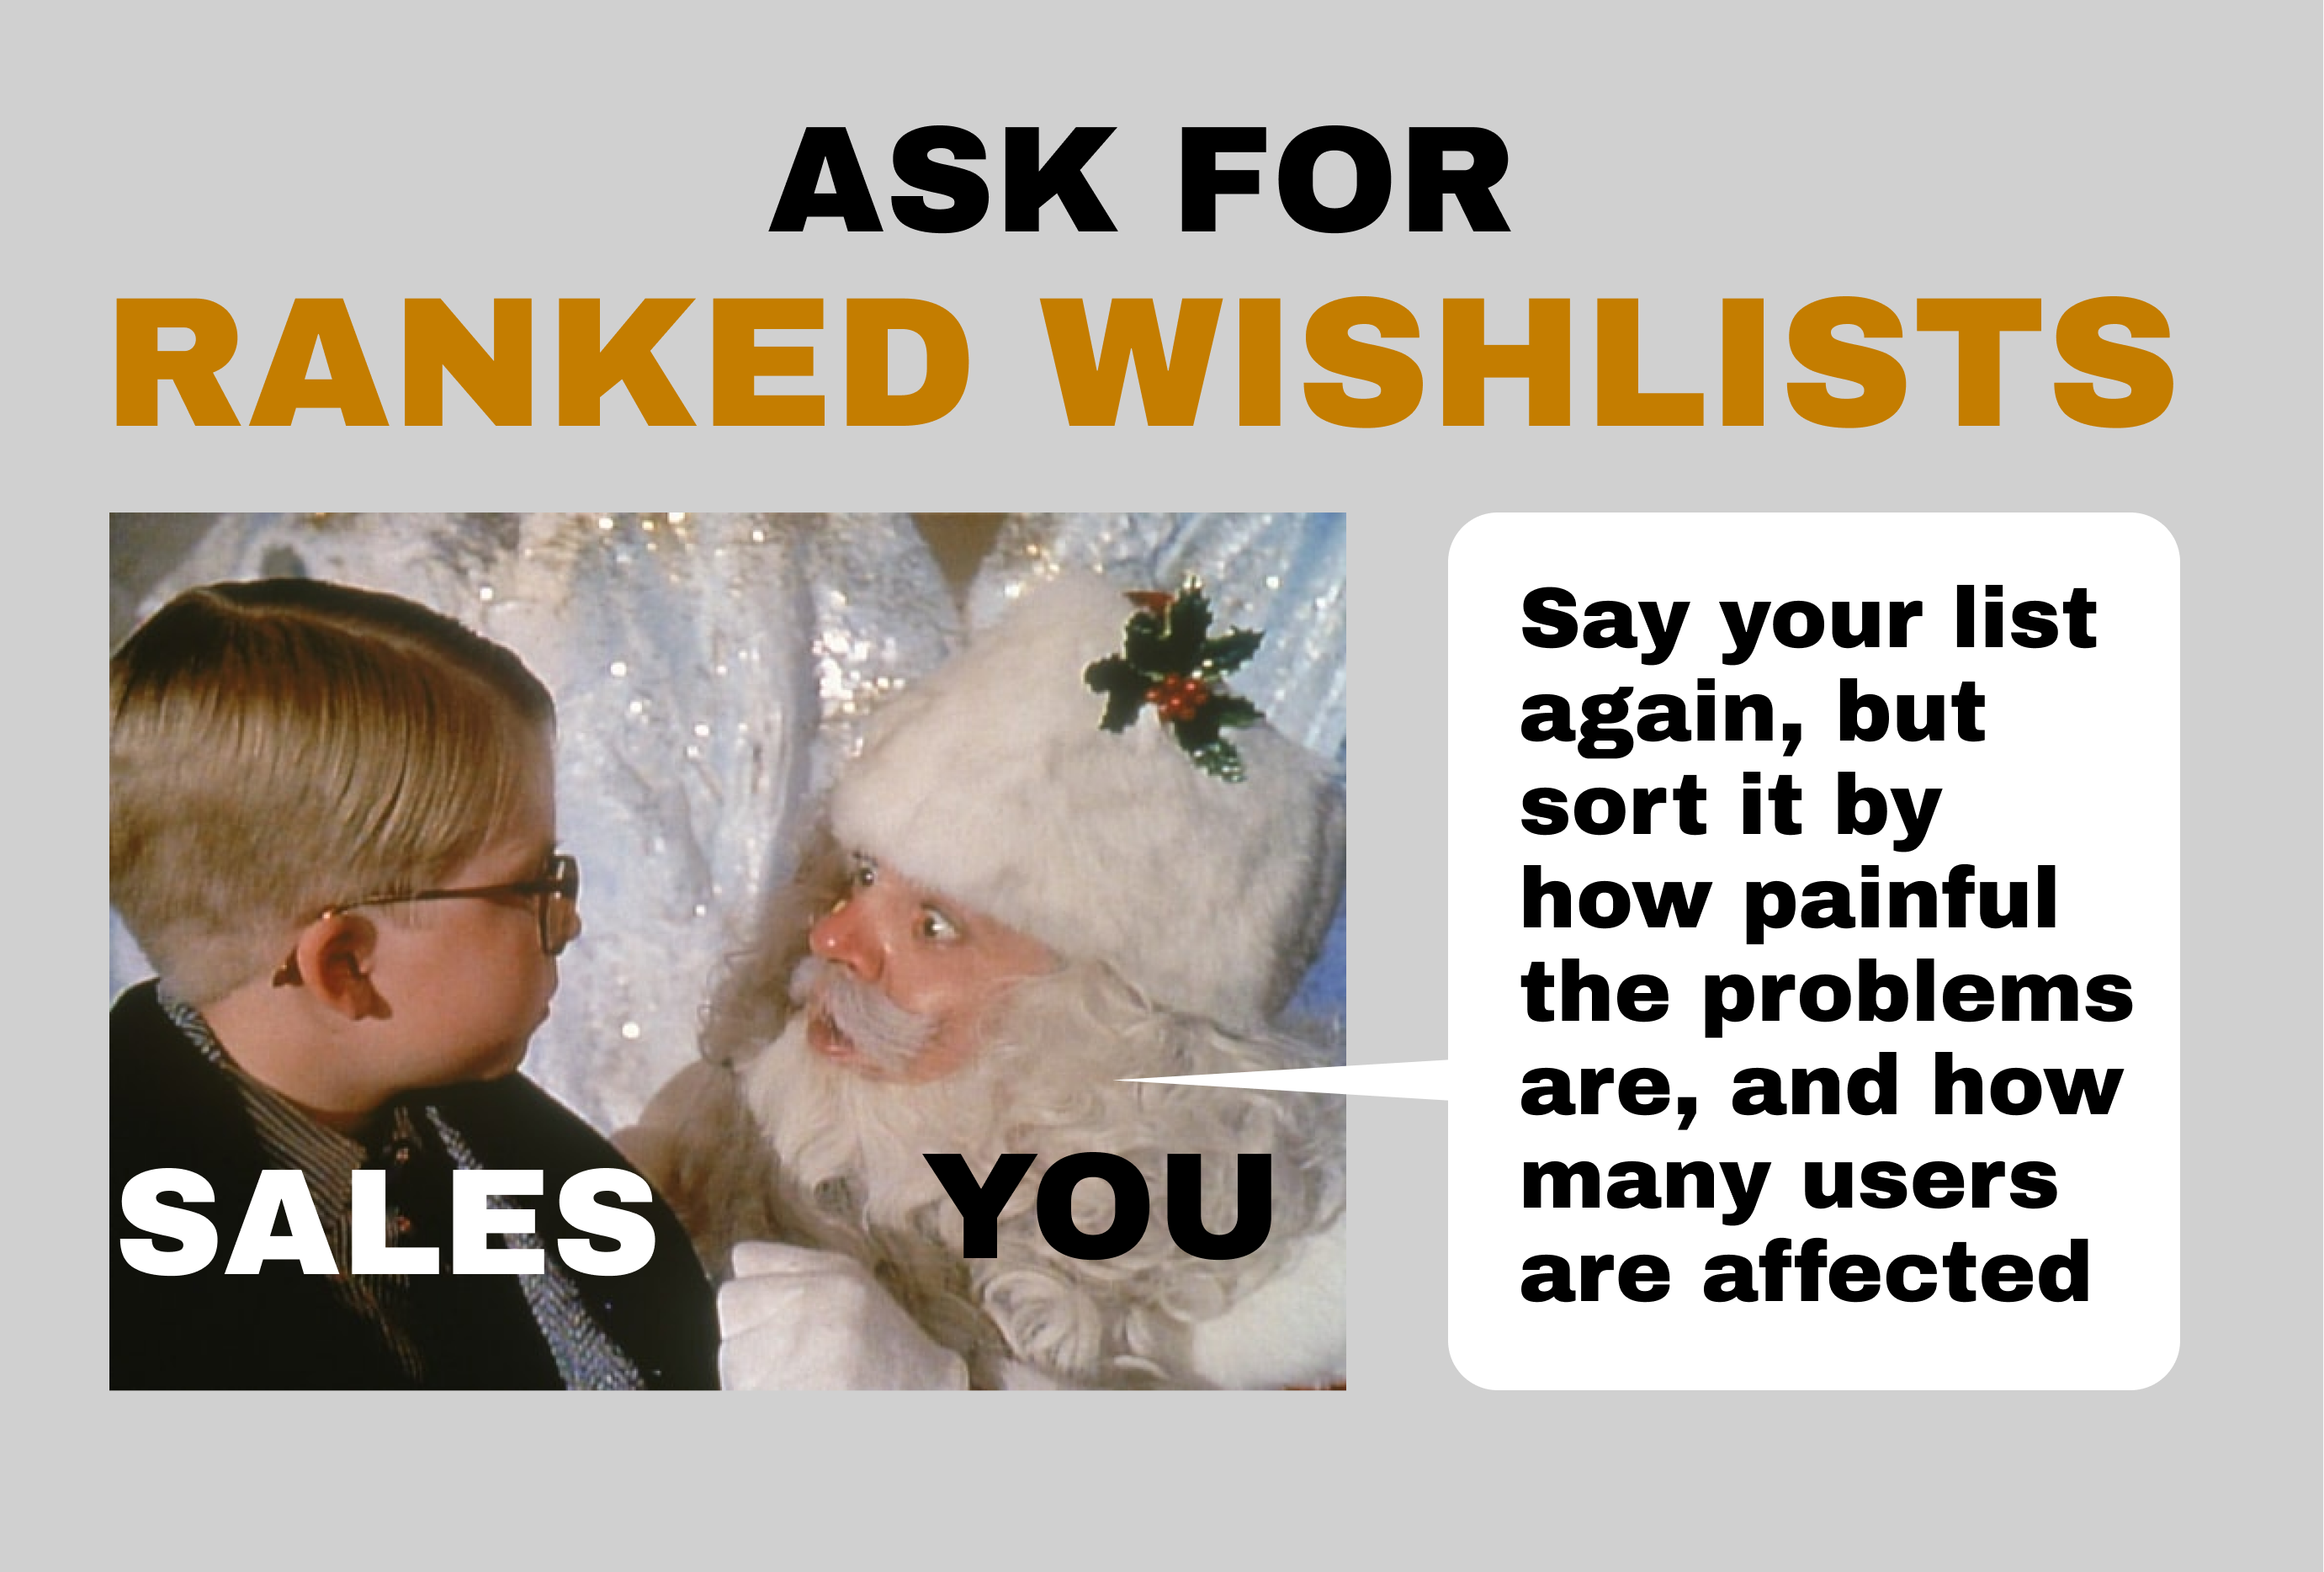 Ask for ranked wishlists